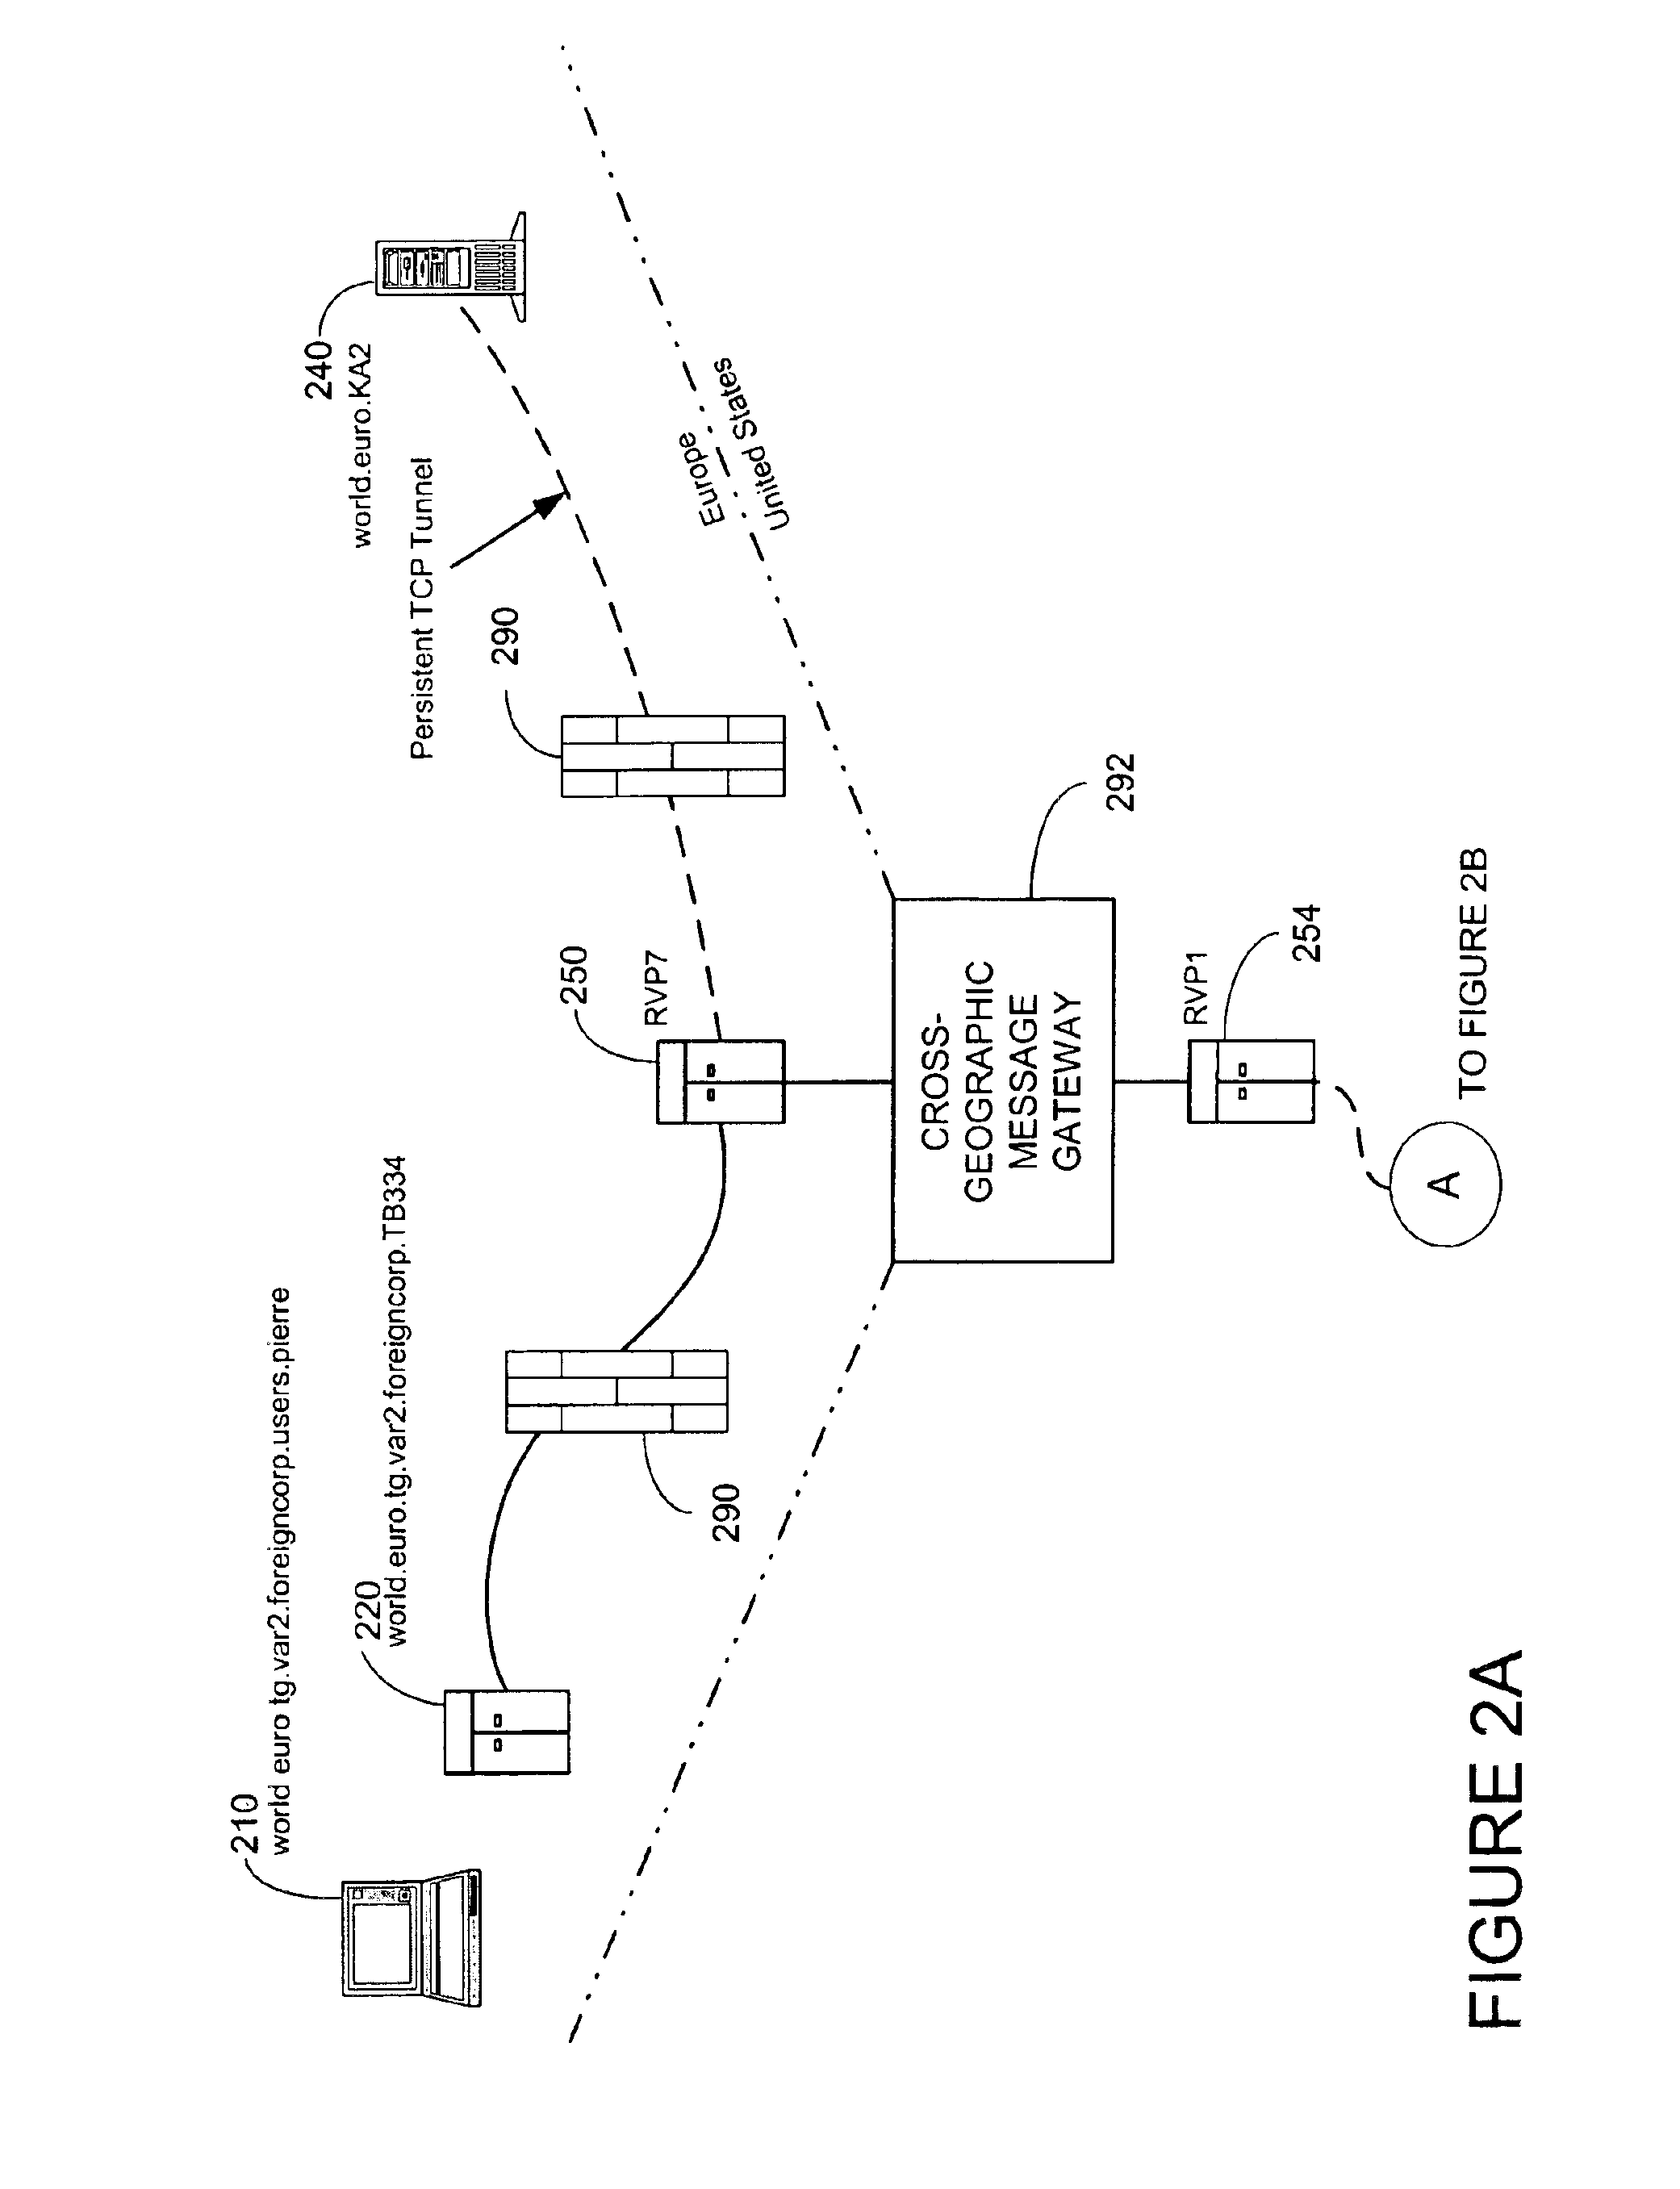 System and method for secure message-oriented network communications